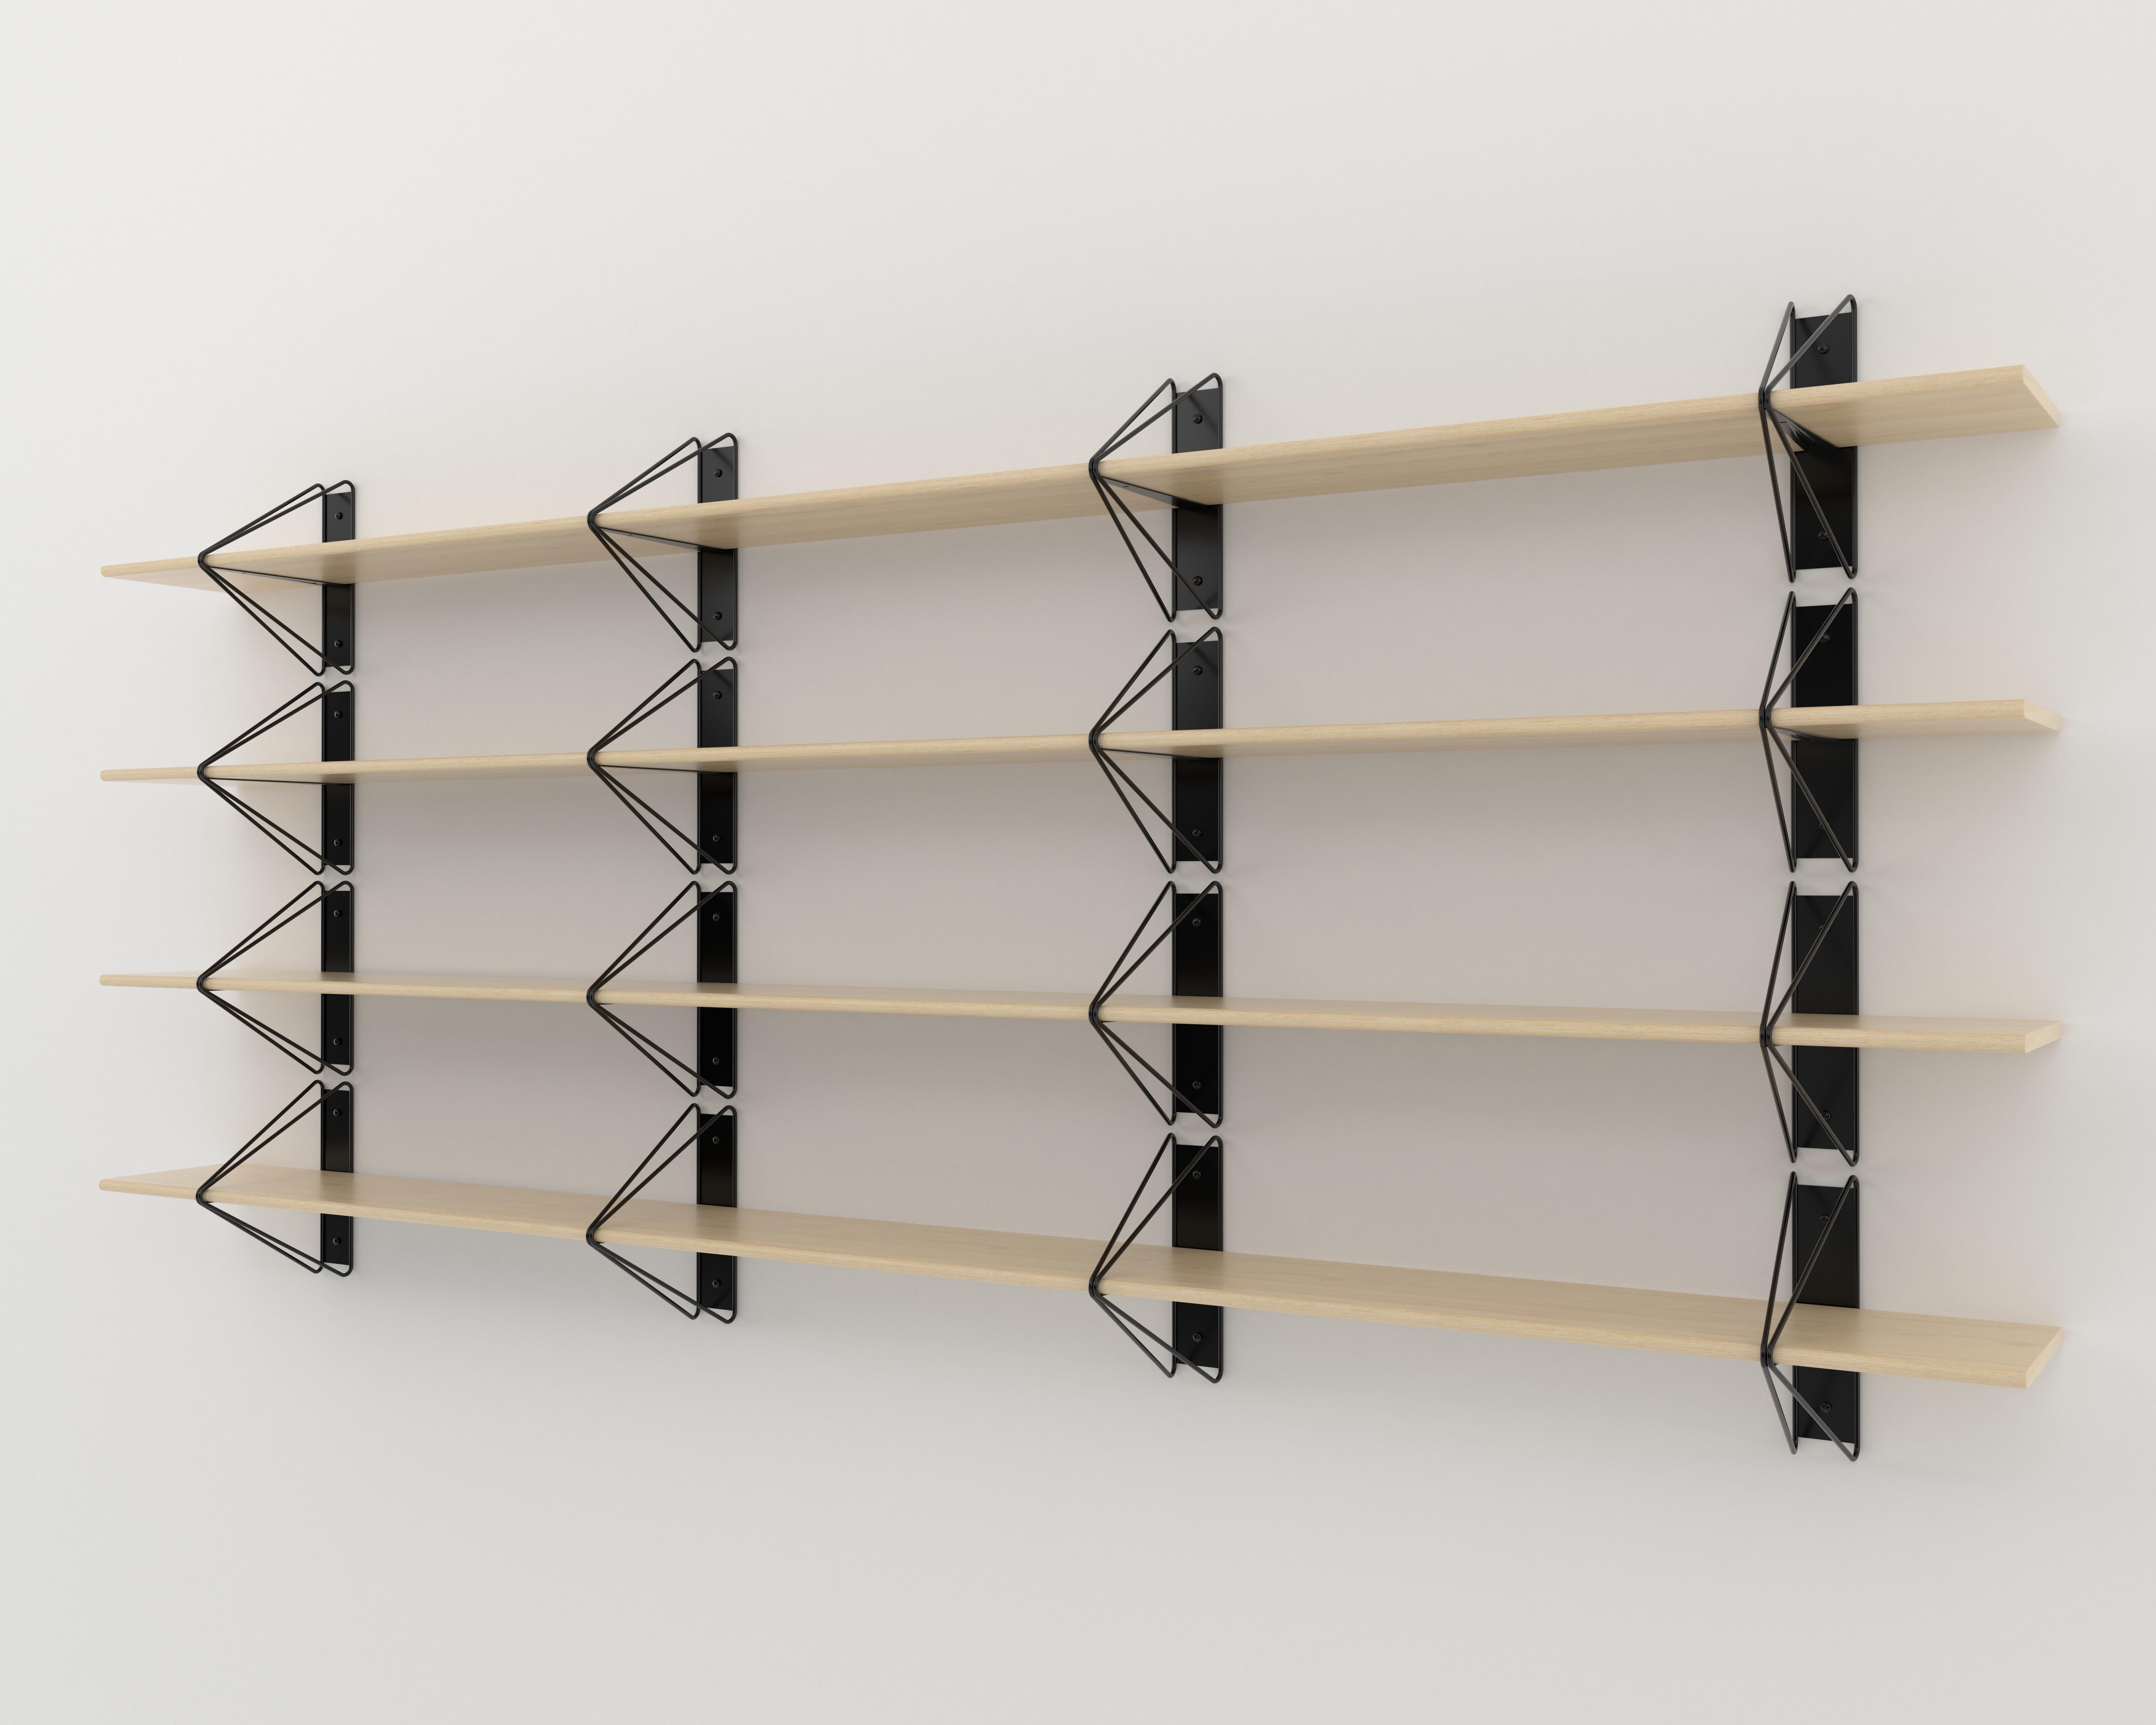 Metal Set of 5 Strut Shelves from Souda, 52in, Black and Walnut, Made to Order For Sale